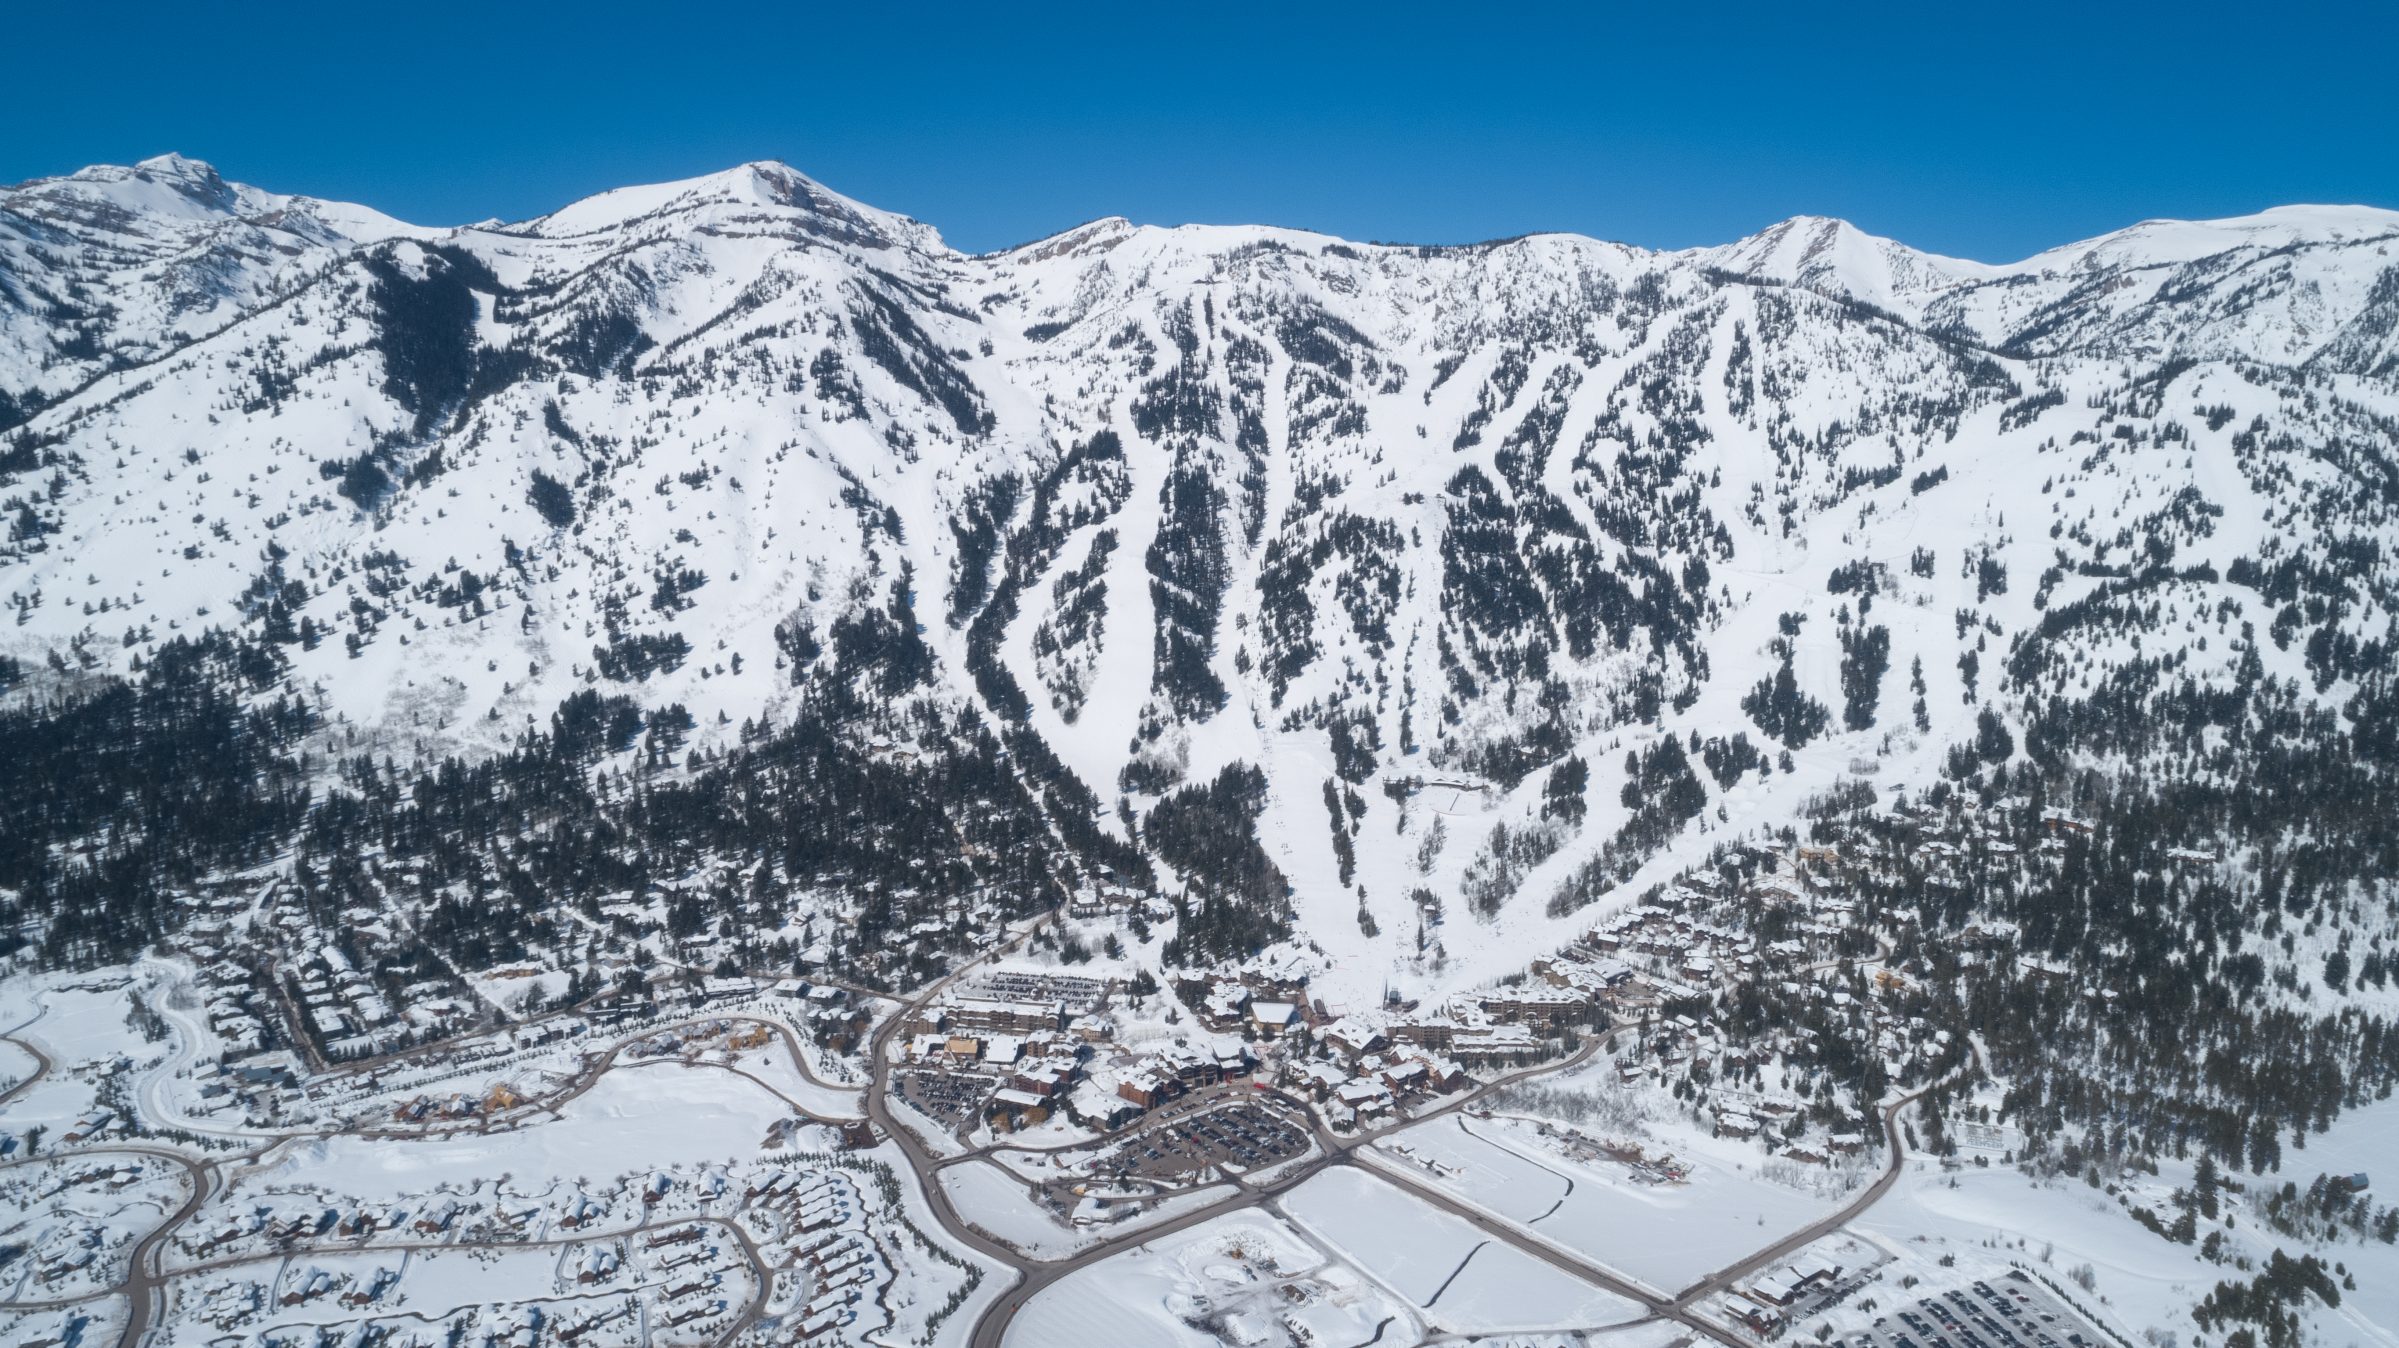 A view of the JHMR slopes and the village at the base of the mountain in Jackson, Wyoming. (Courtesy Jackson Hole Mountain Resort)